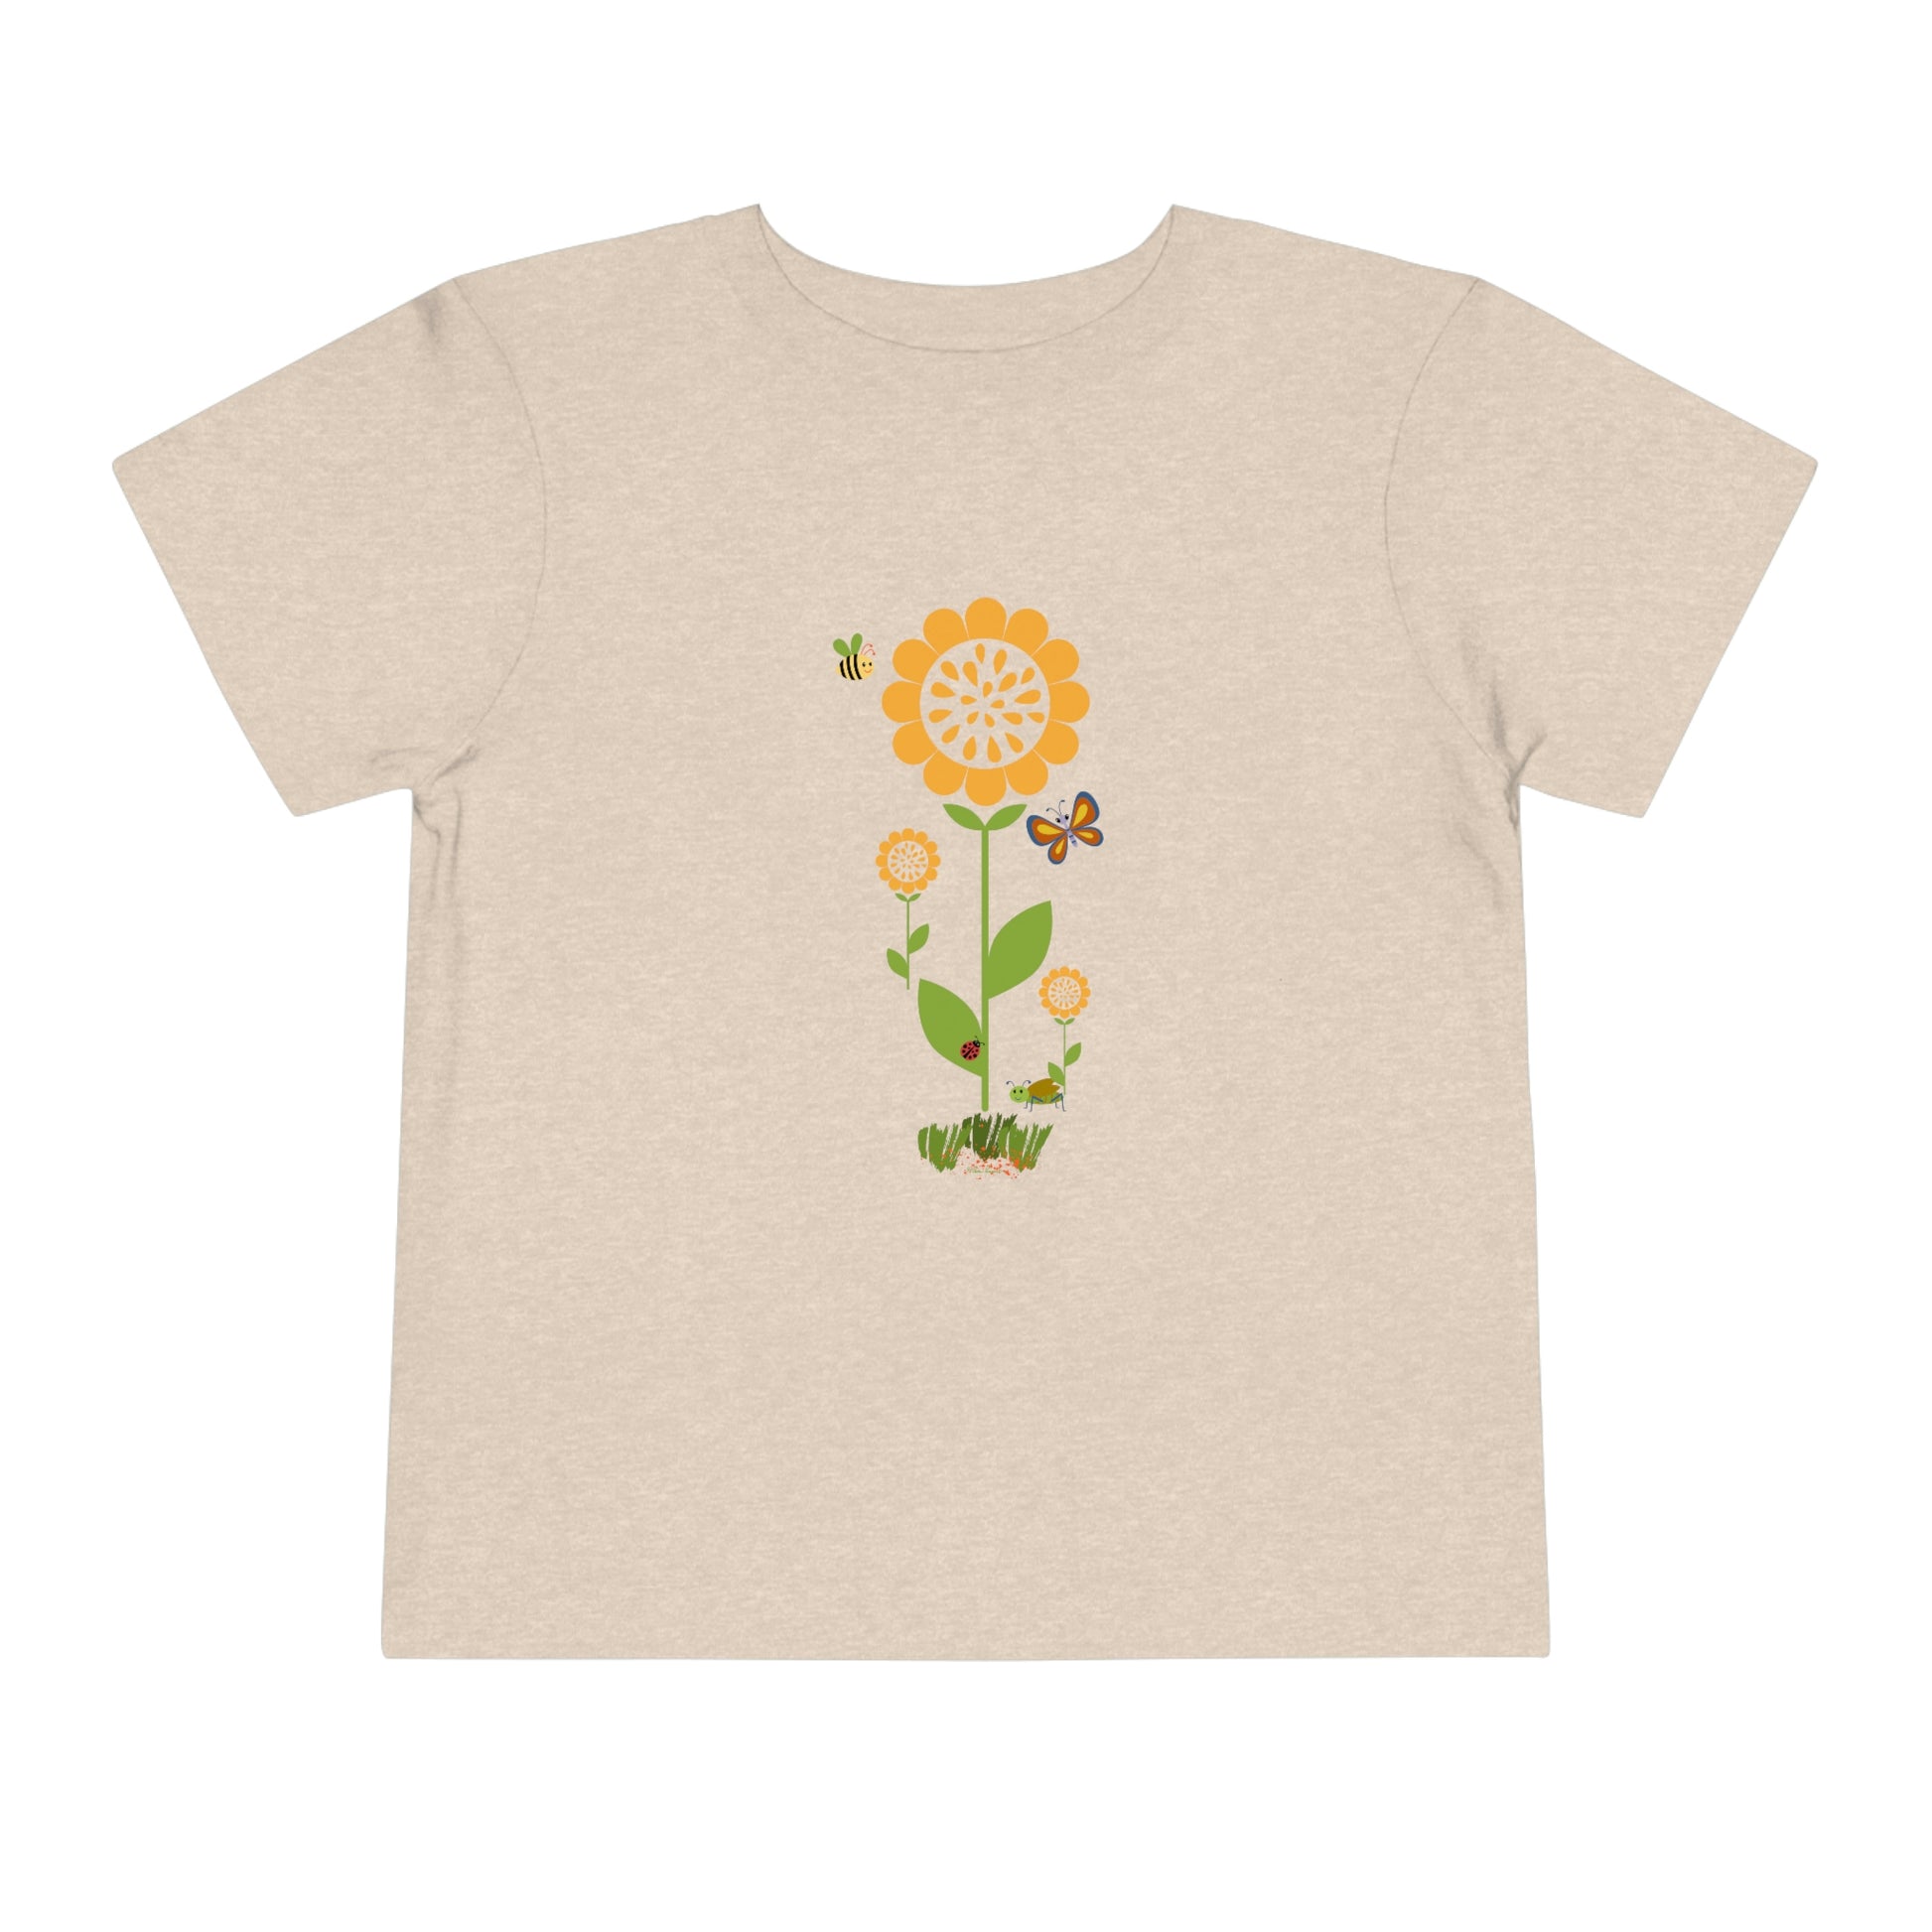 Flat front view of the Heather Dust t-shirt